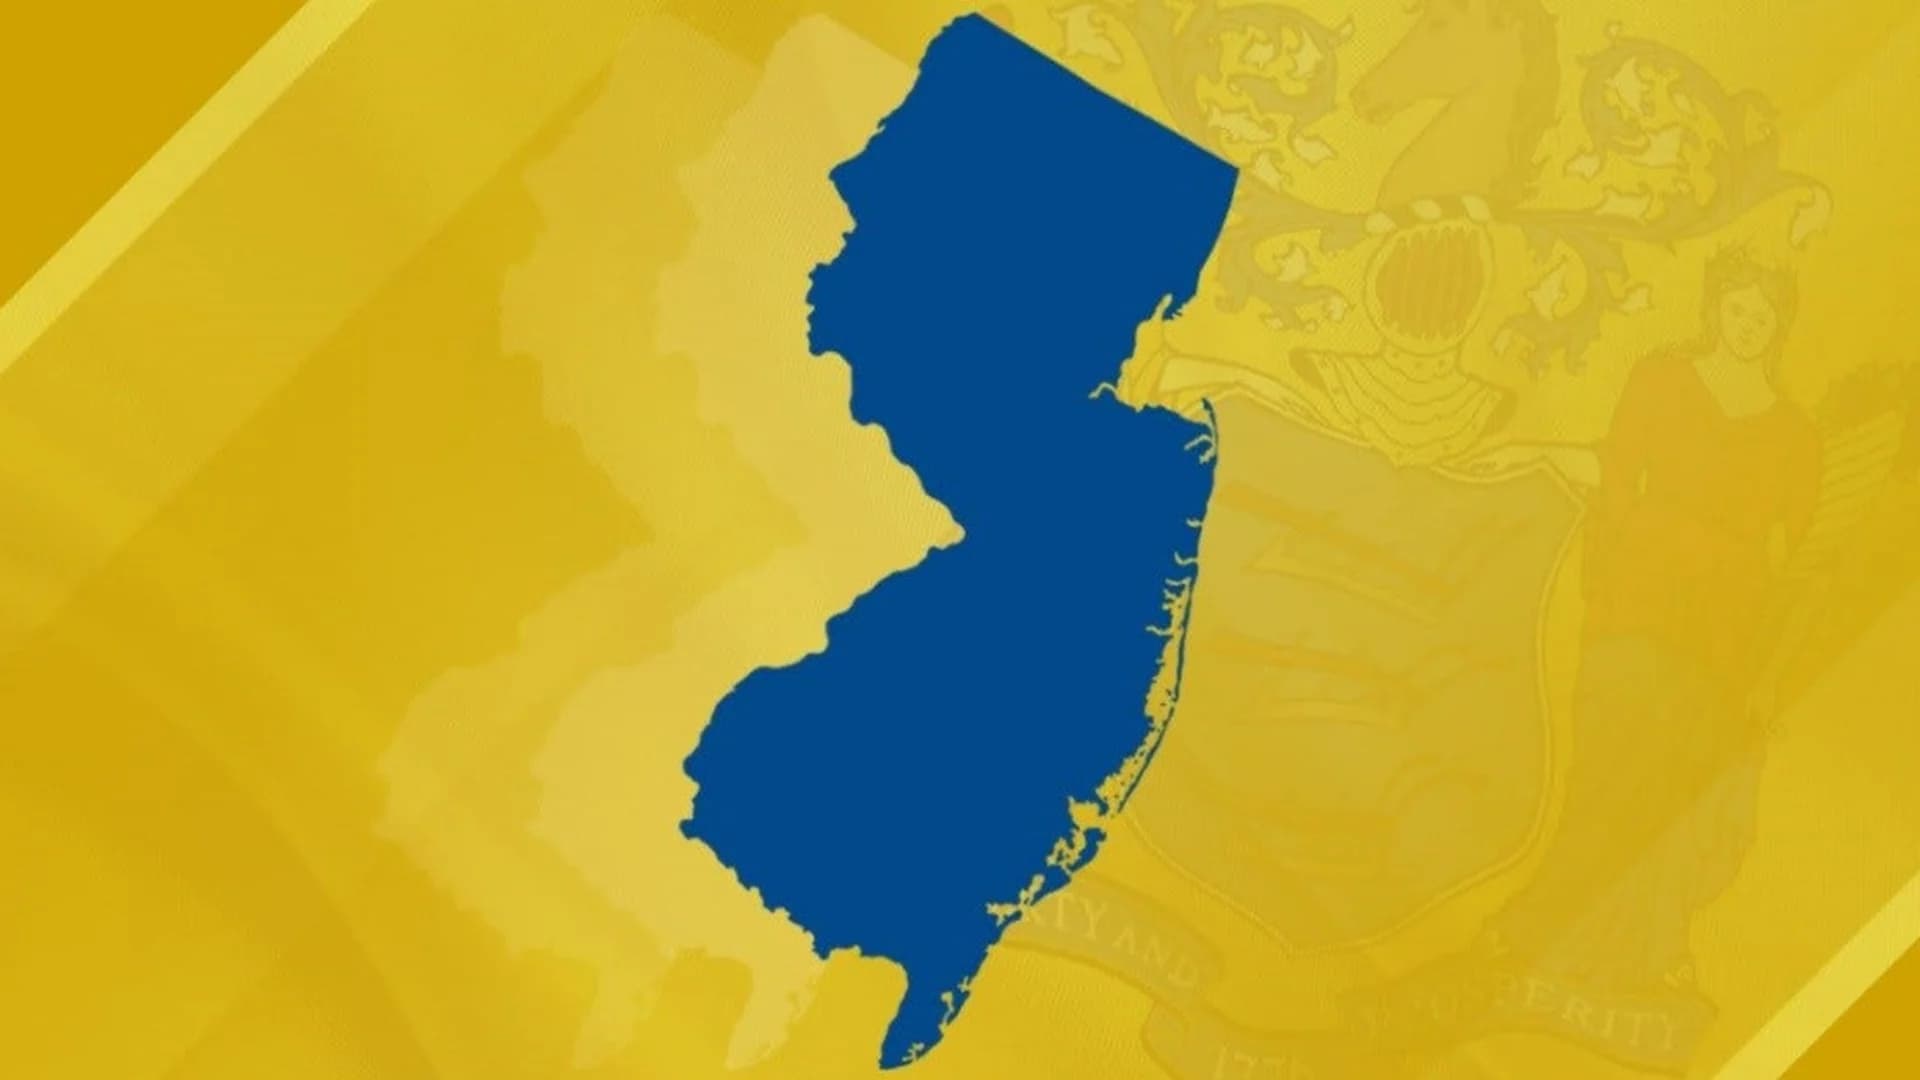 Another reason to love the Garden State? Report says New Jersey residents live longer than most states